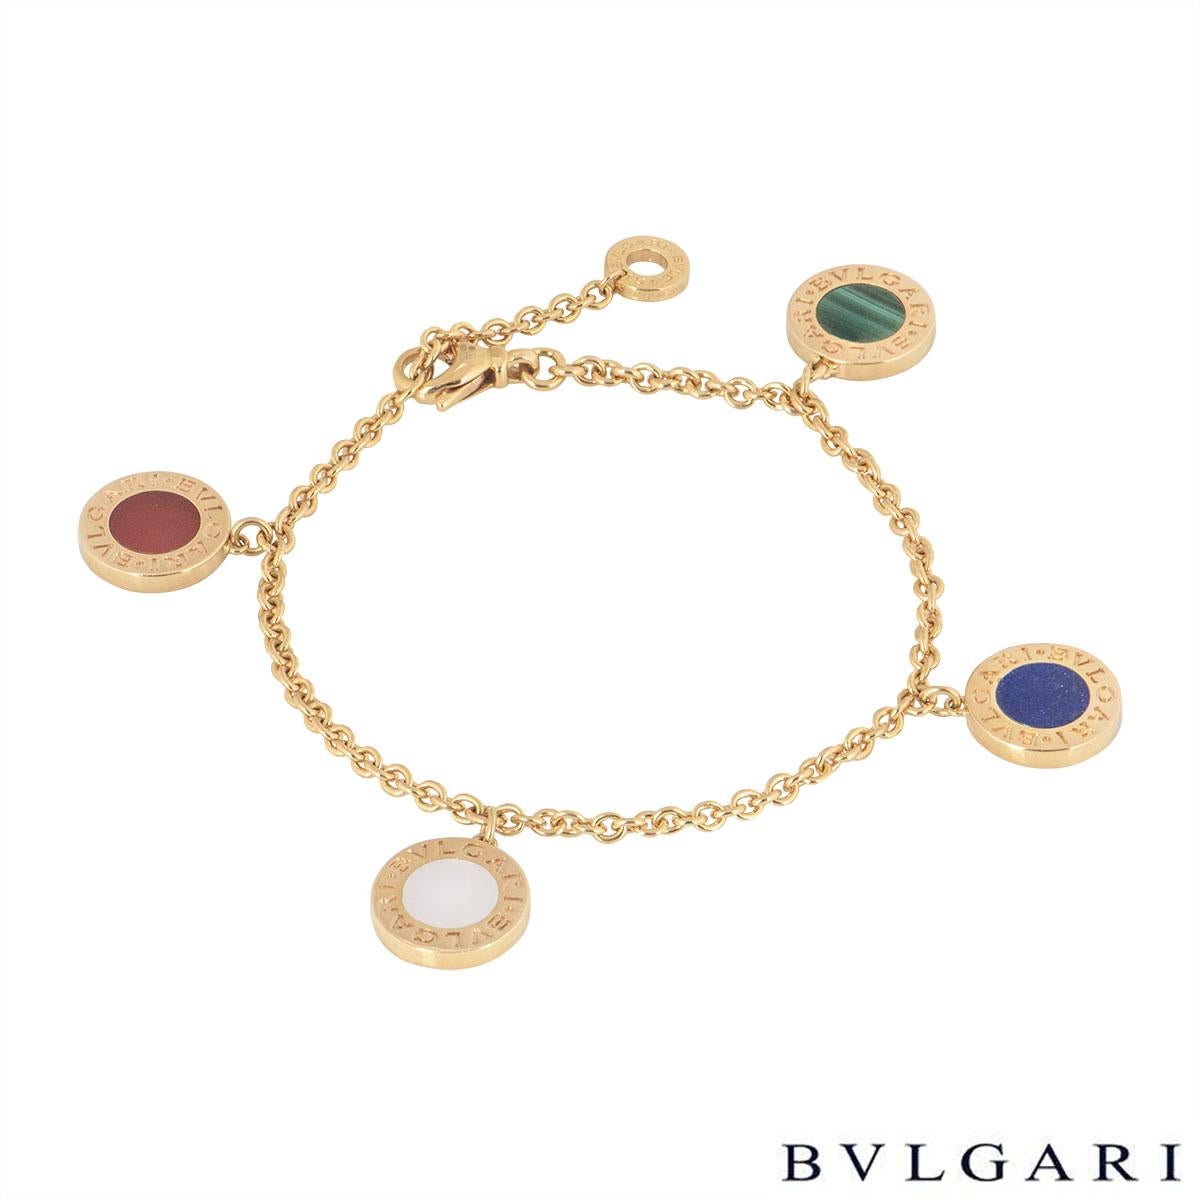 An 18k rose gold bracelet by Bvlgari from the 'Bvlgari Bvlgari' collection. The bracelet features 4 circular disks set with carnelian, lapis, malachite and mother of pearl to both sides. The bracelet features a lobster clasp with a length of